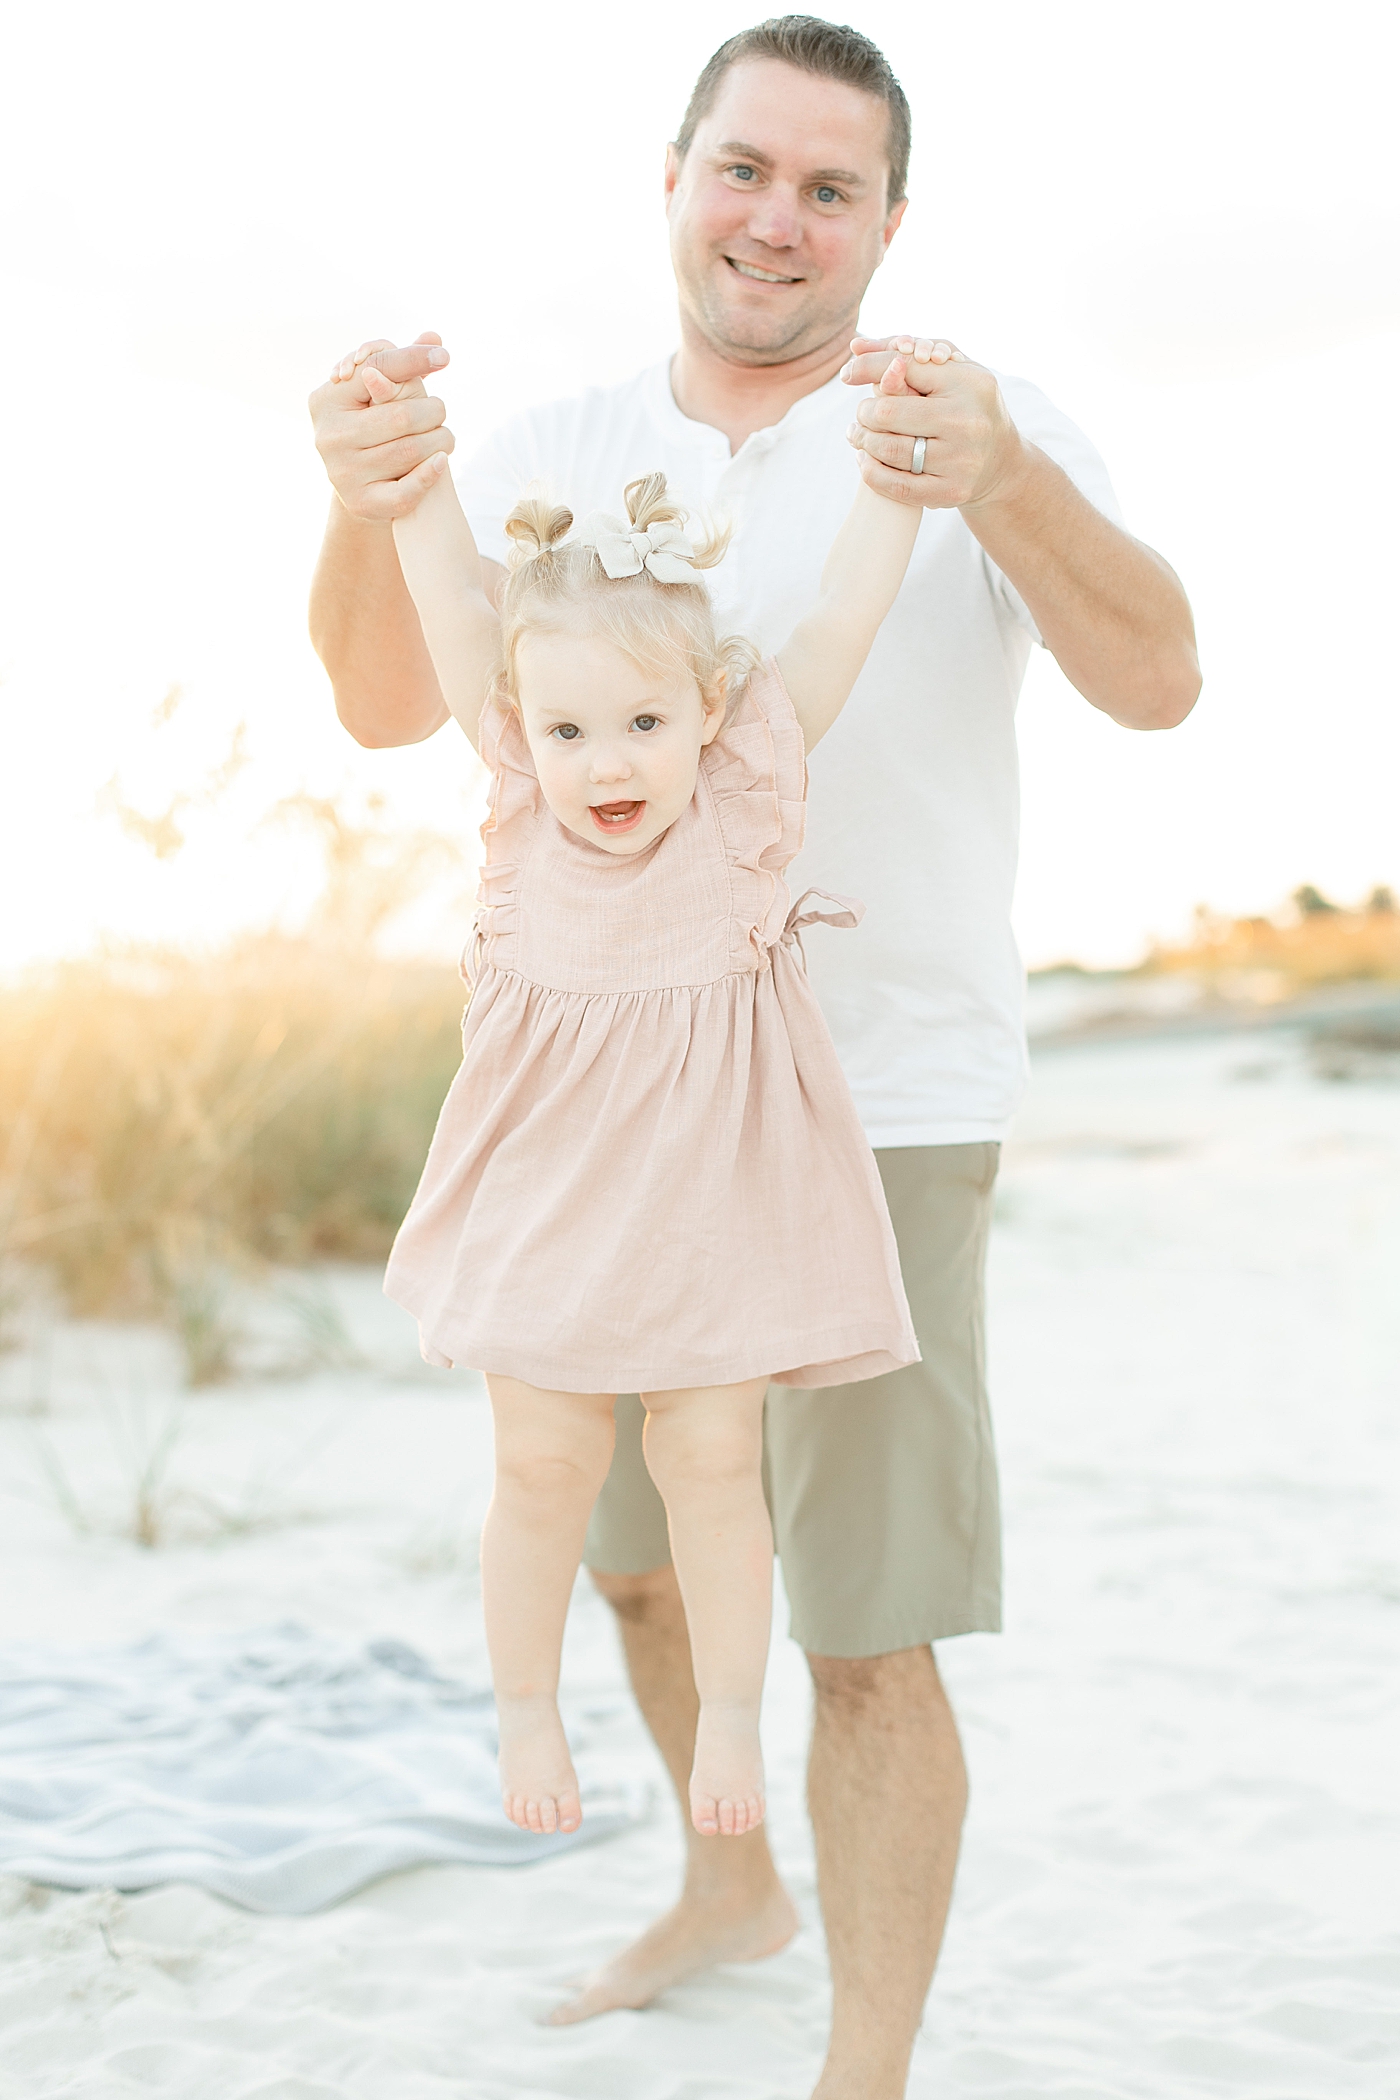 Dad playing with toddler baby girl on the beach | Photo by Bay St. Louis MS Family Photographer Little Sunshine Photography